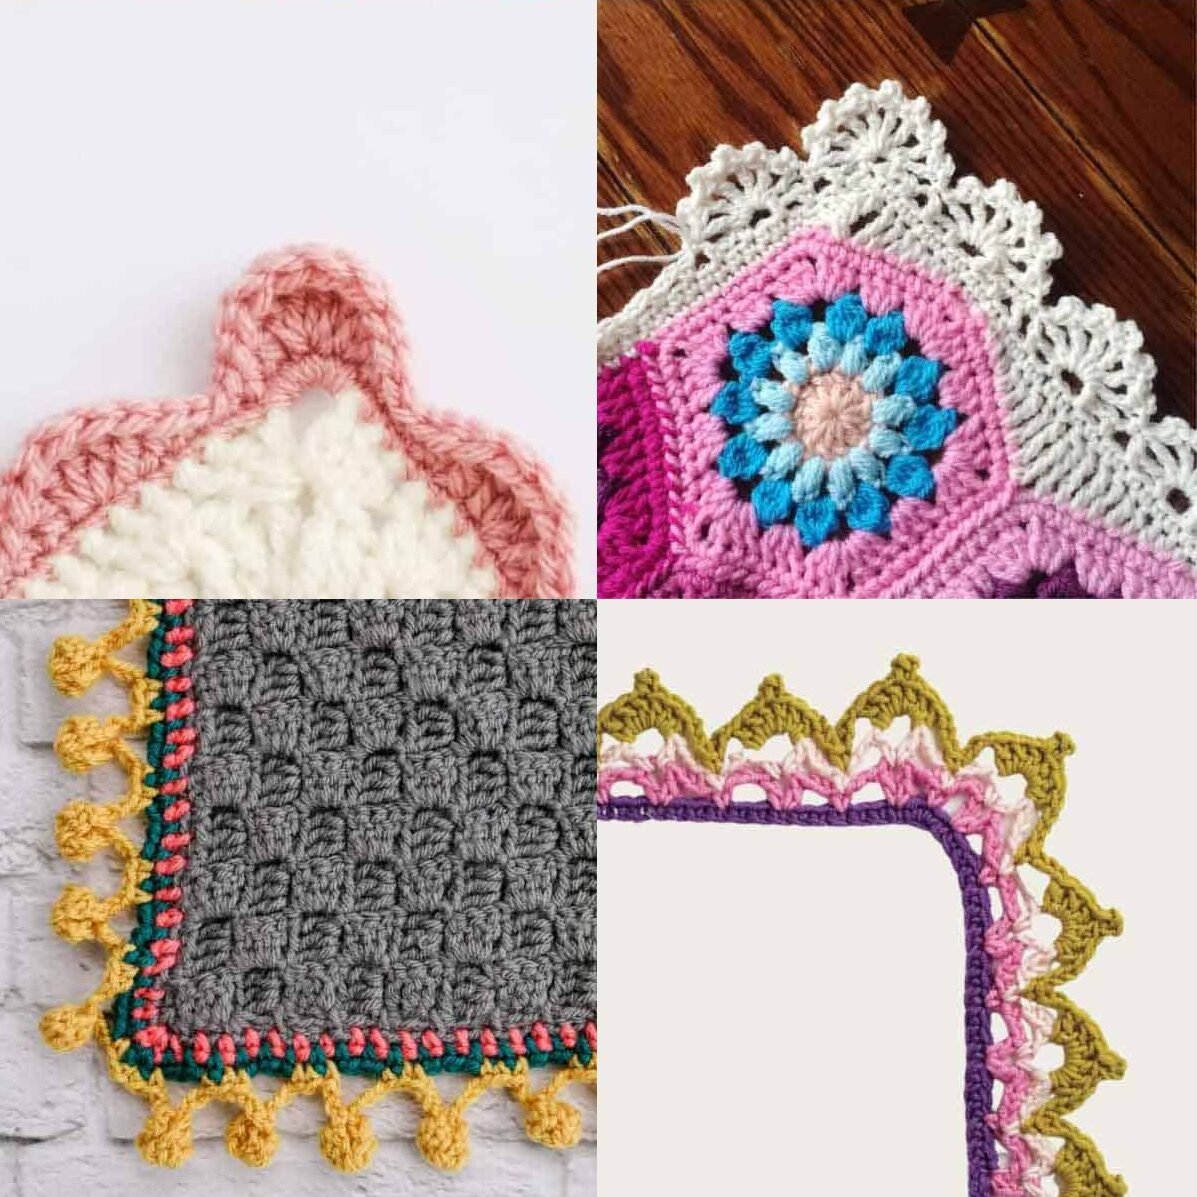 Easy to Crochet Tape Lace Edge pattern